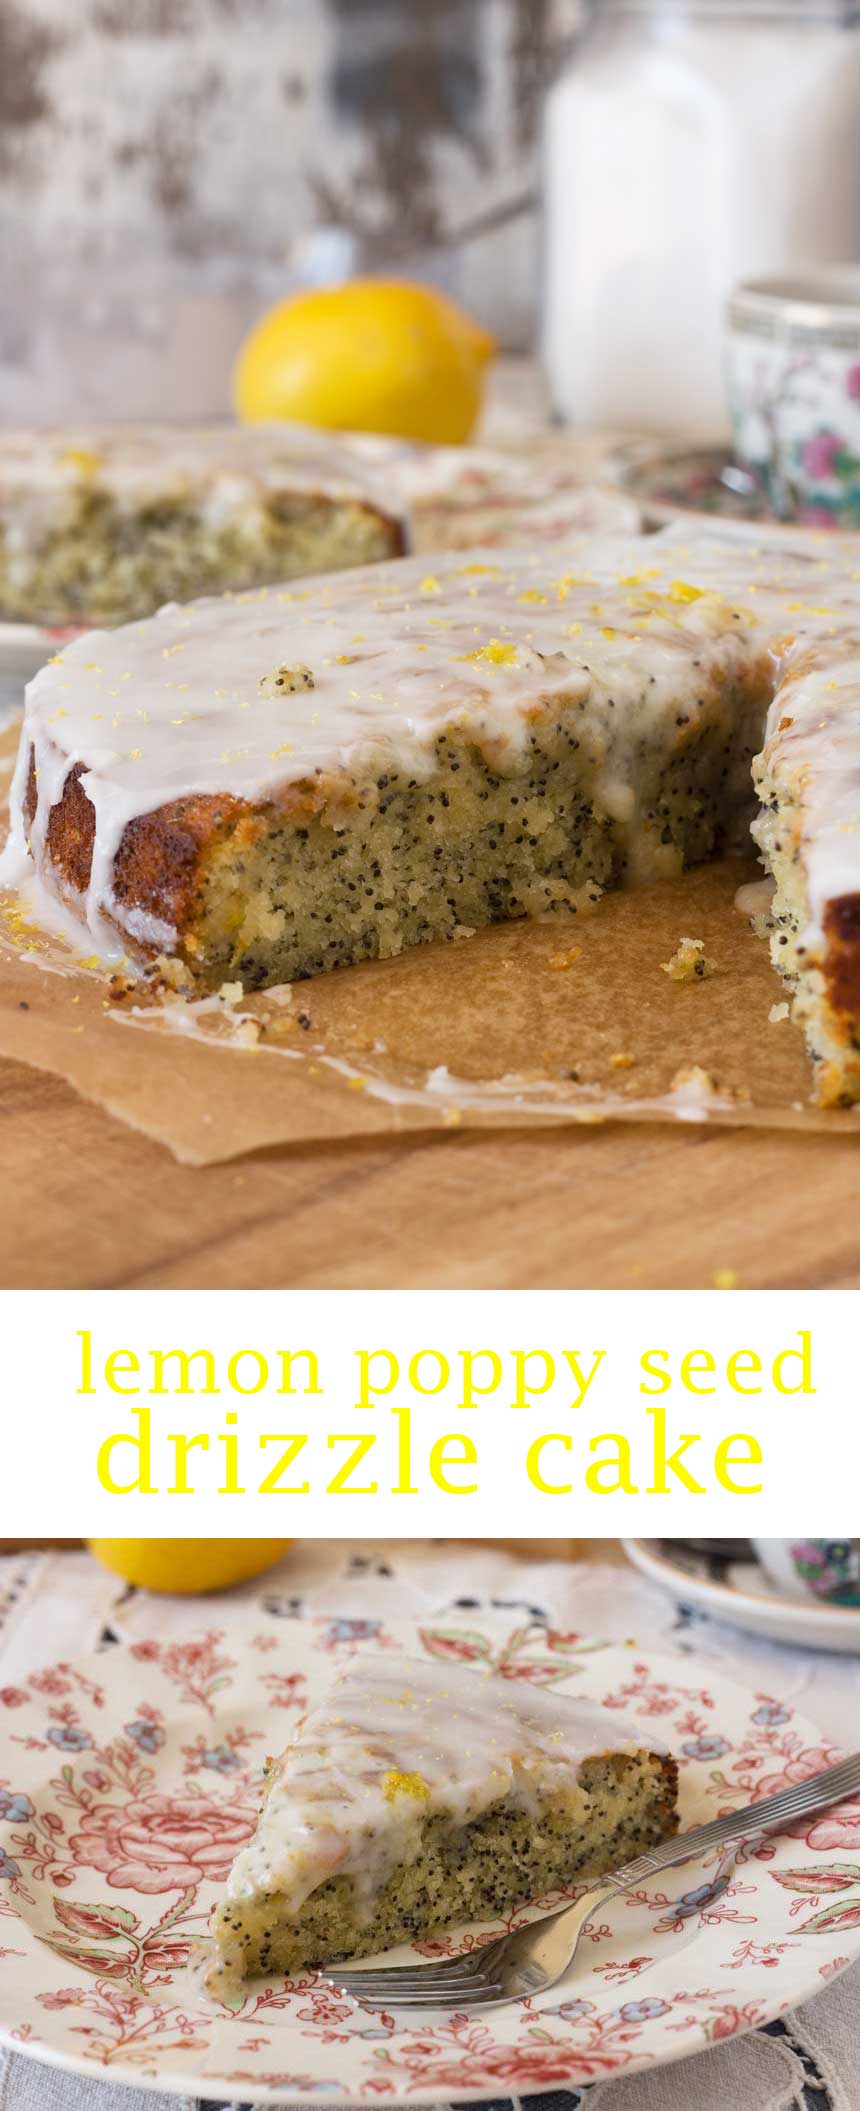 Pinterest pin with a yellow title on it and photo of a lemon poppy seed drizzle cake with a big piece cut out.